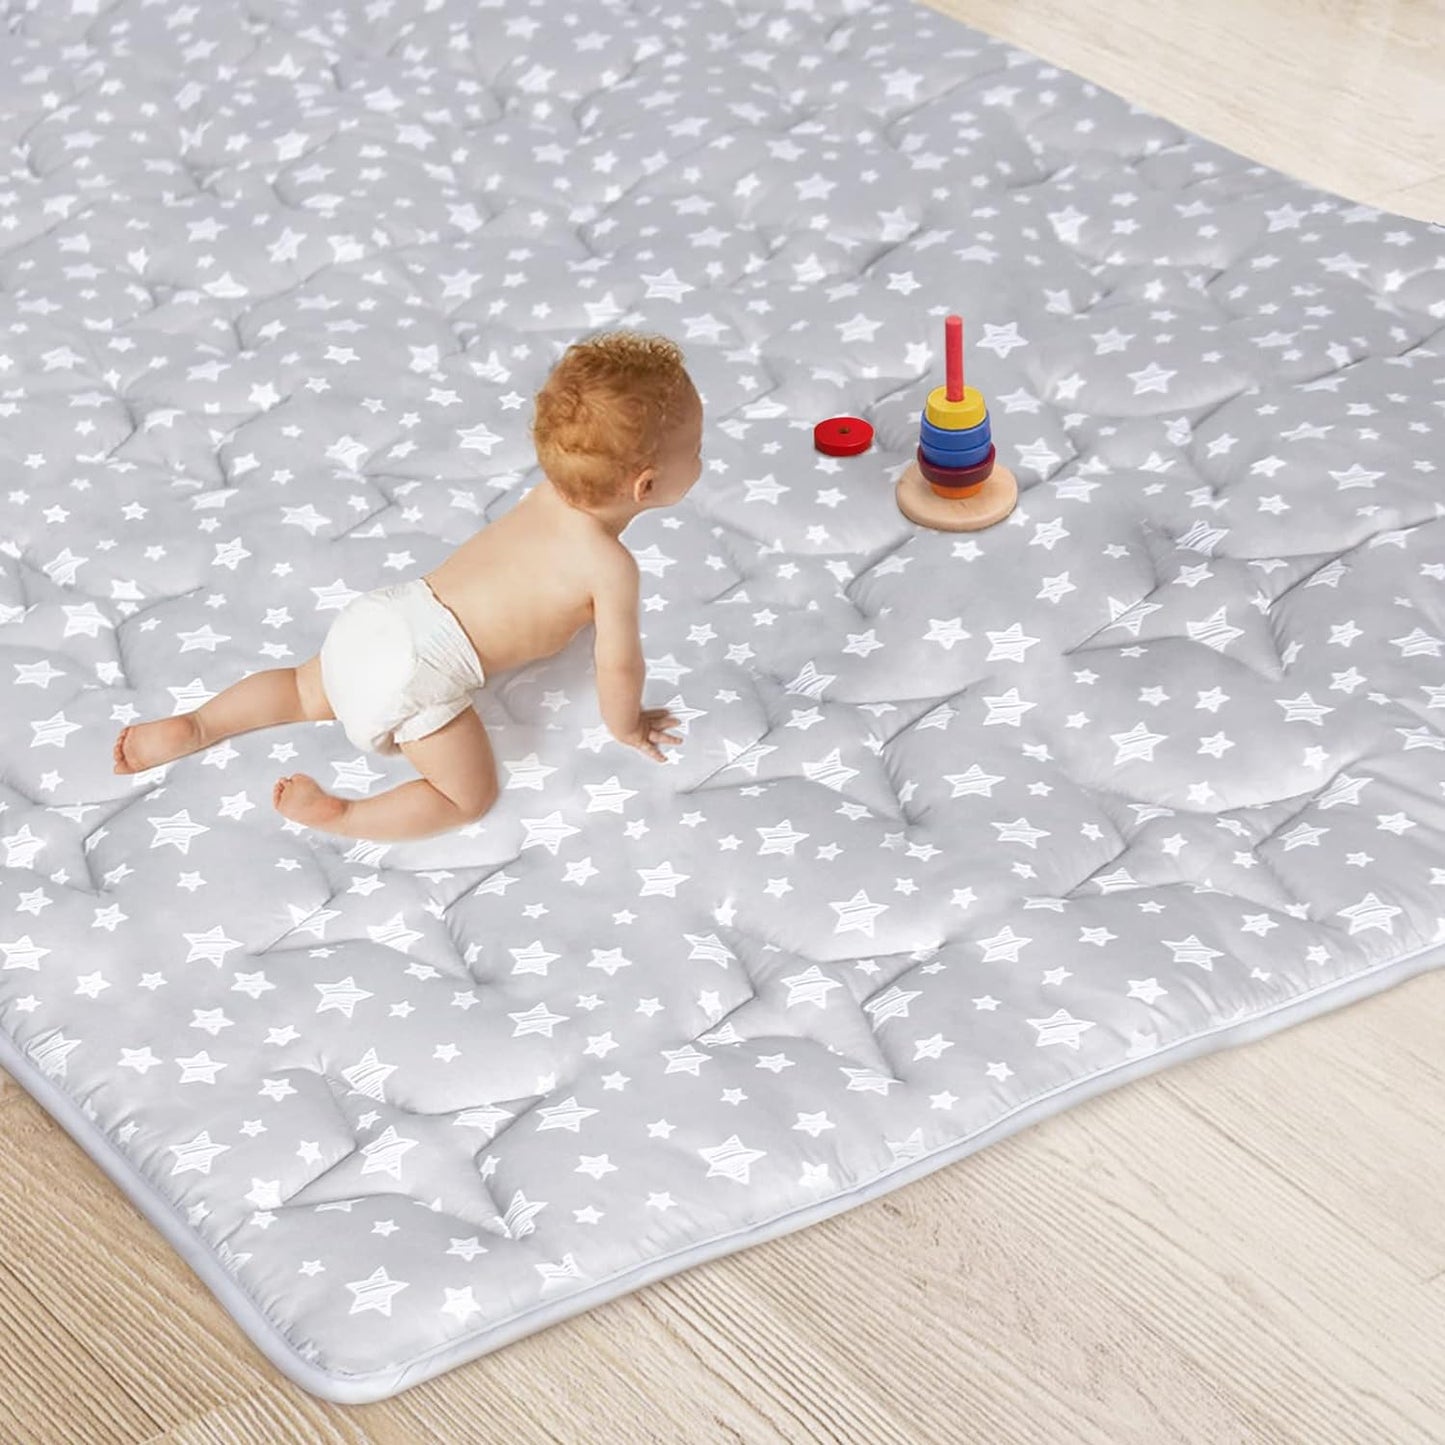 Baby Play Mat | Playpen Mat - 79" x 63", Large Padded Tummy Time Activity Mat for Infant & Toddler, Grey Star - Moonsea Bedding